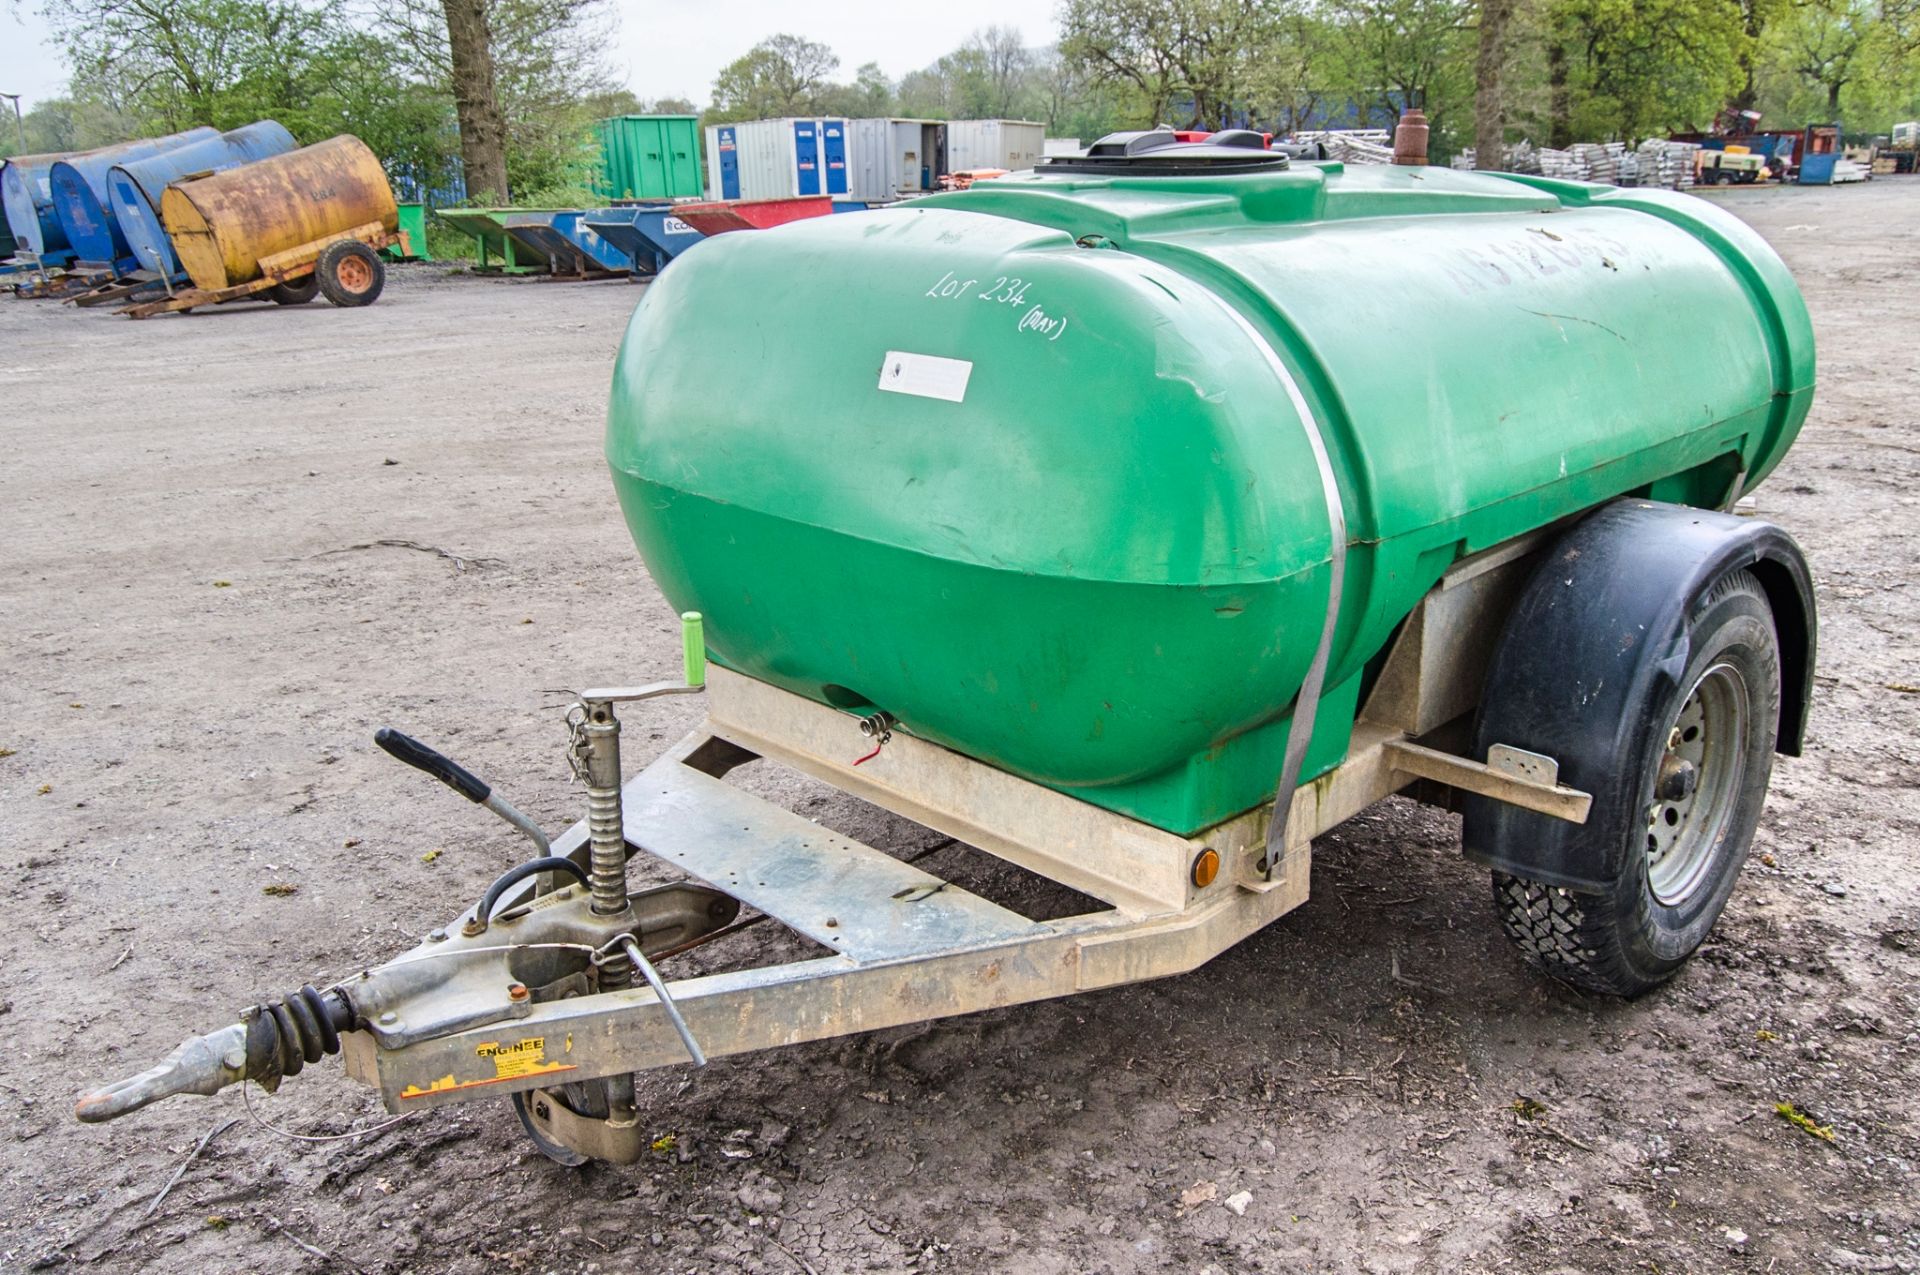 Trailer Engineering 2000 litre fast tow mobile water bowser A612645